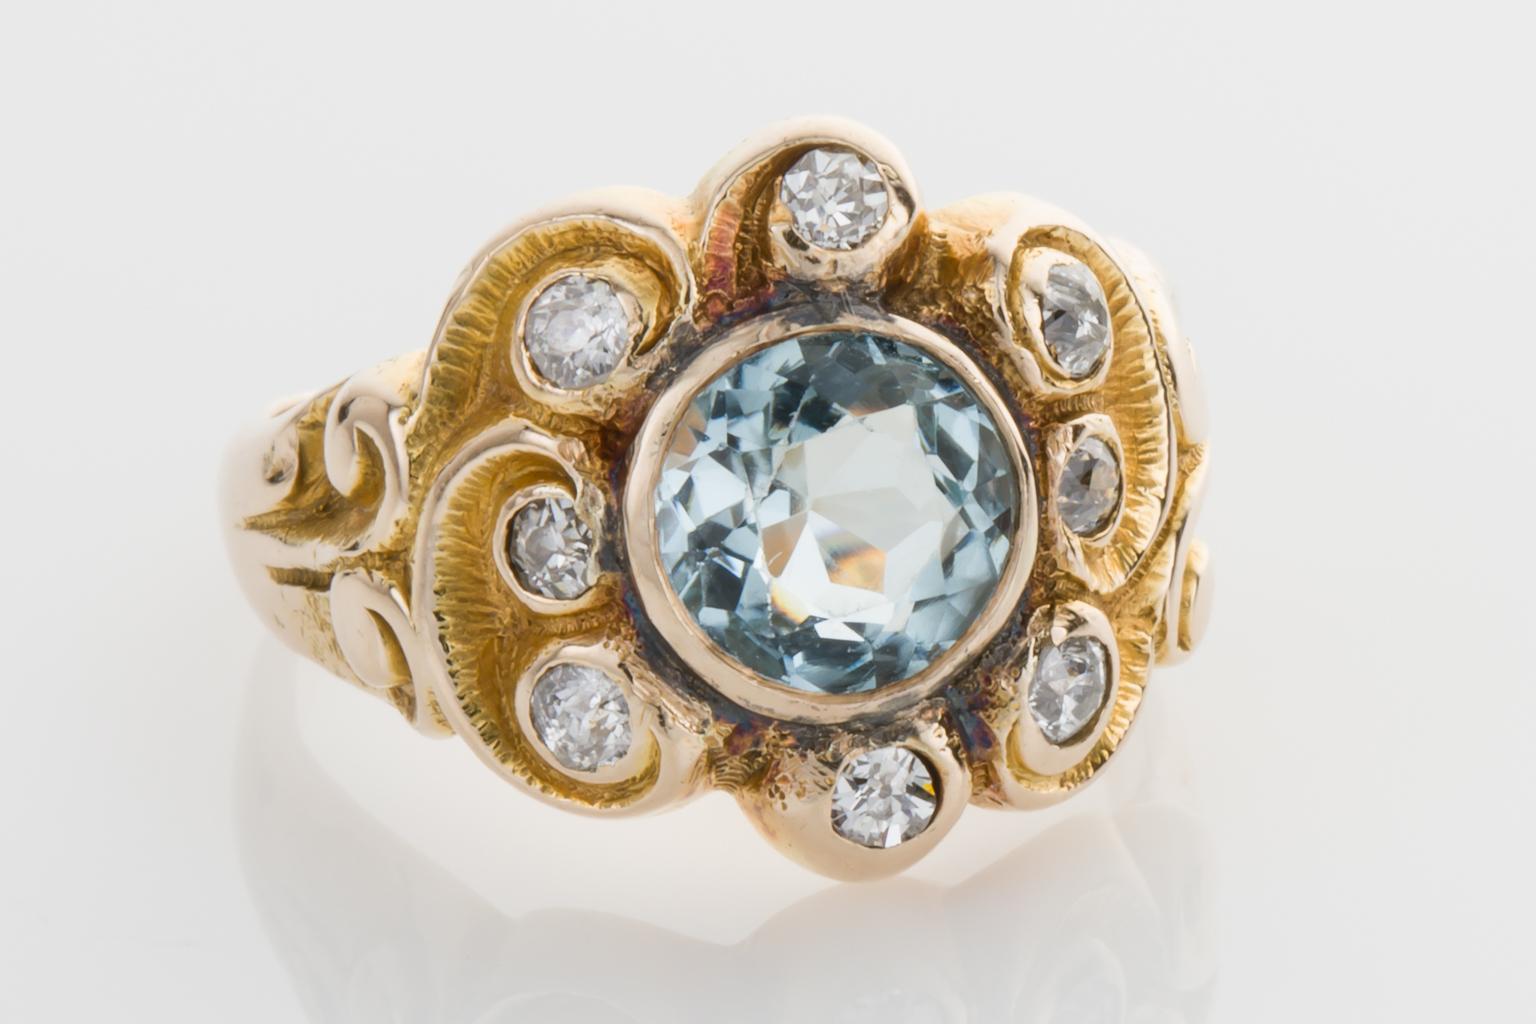 Aquamarine rings are so fashionable and sought after, but what if you love aquamarines and would prefer something that is completely different to what everyone else is wearing?  Here it is!  A classic Art Nouveau ring set with a pretty blue round